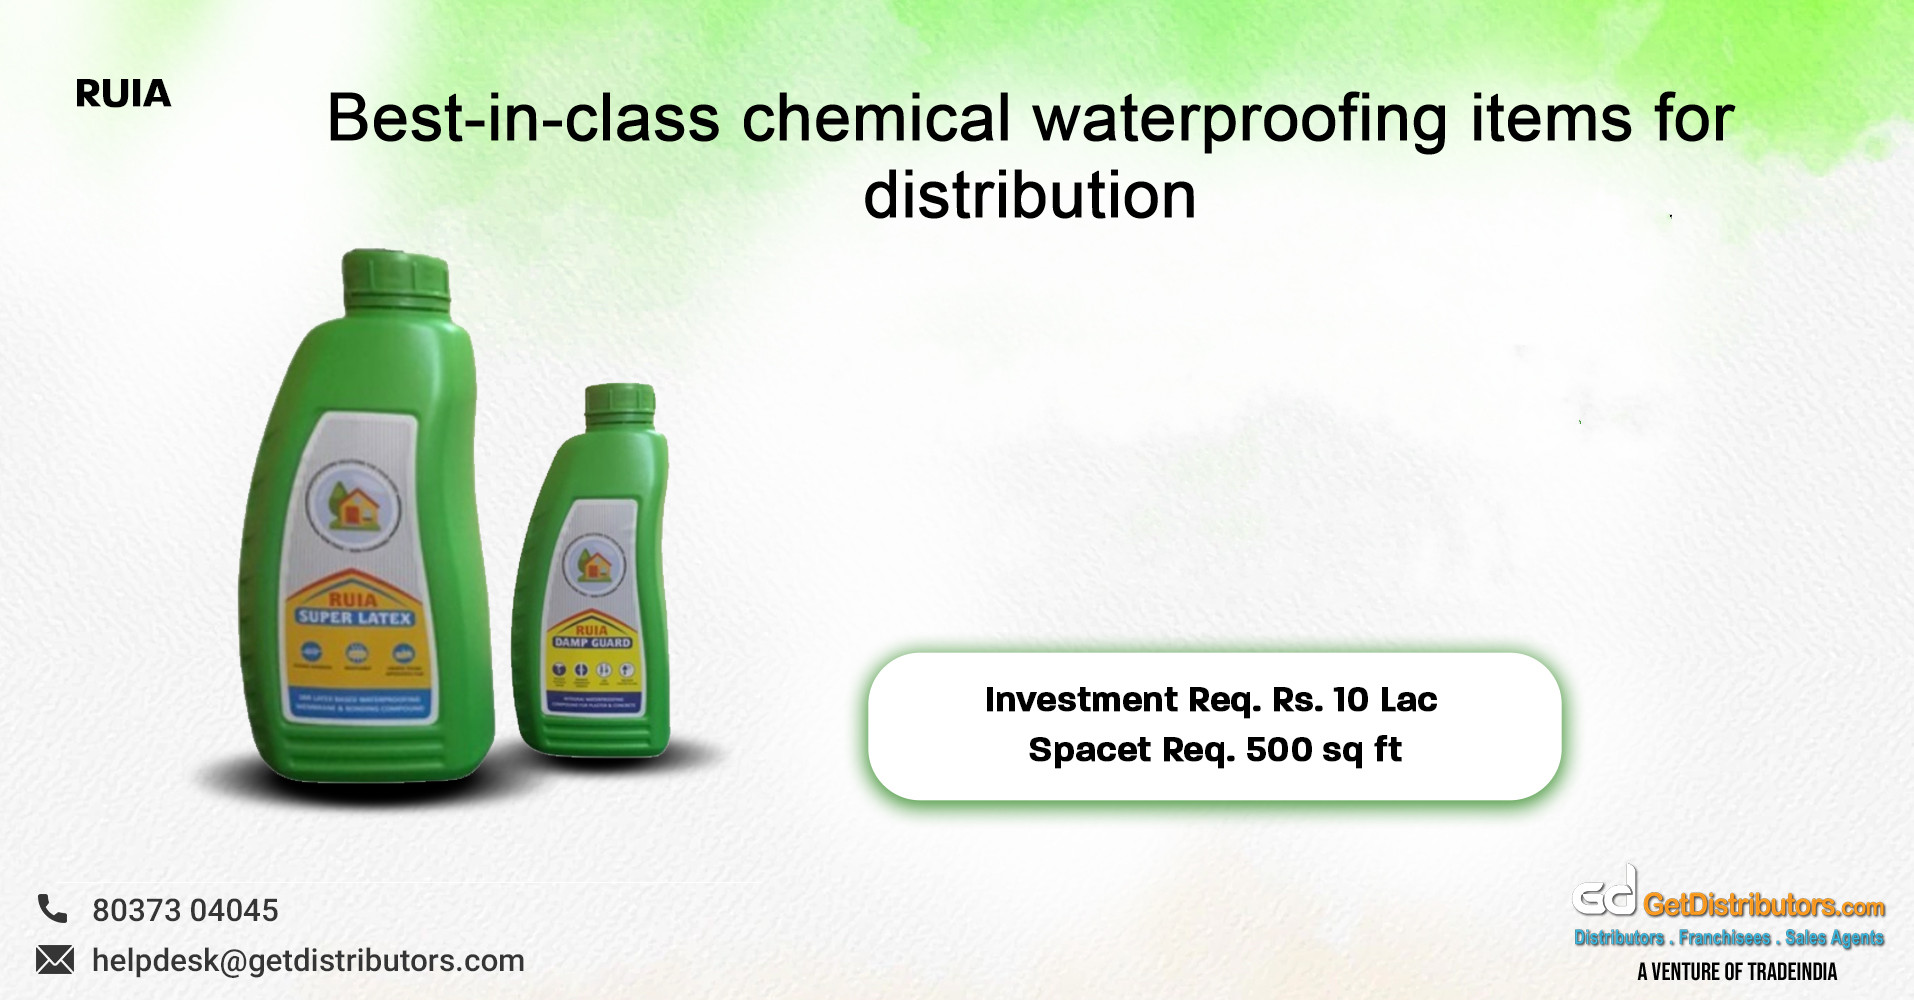 Best-in-class chemical waterproofing items for distribution